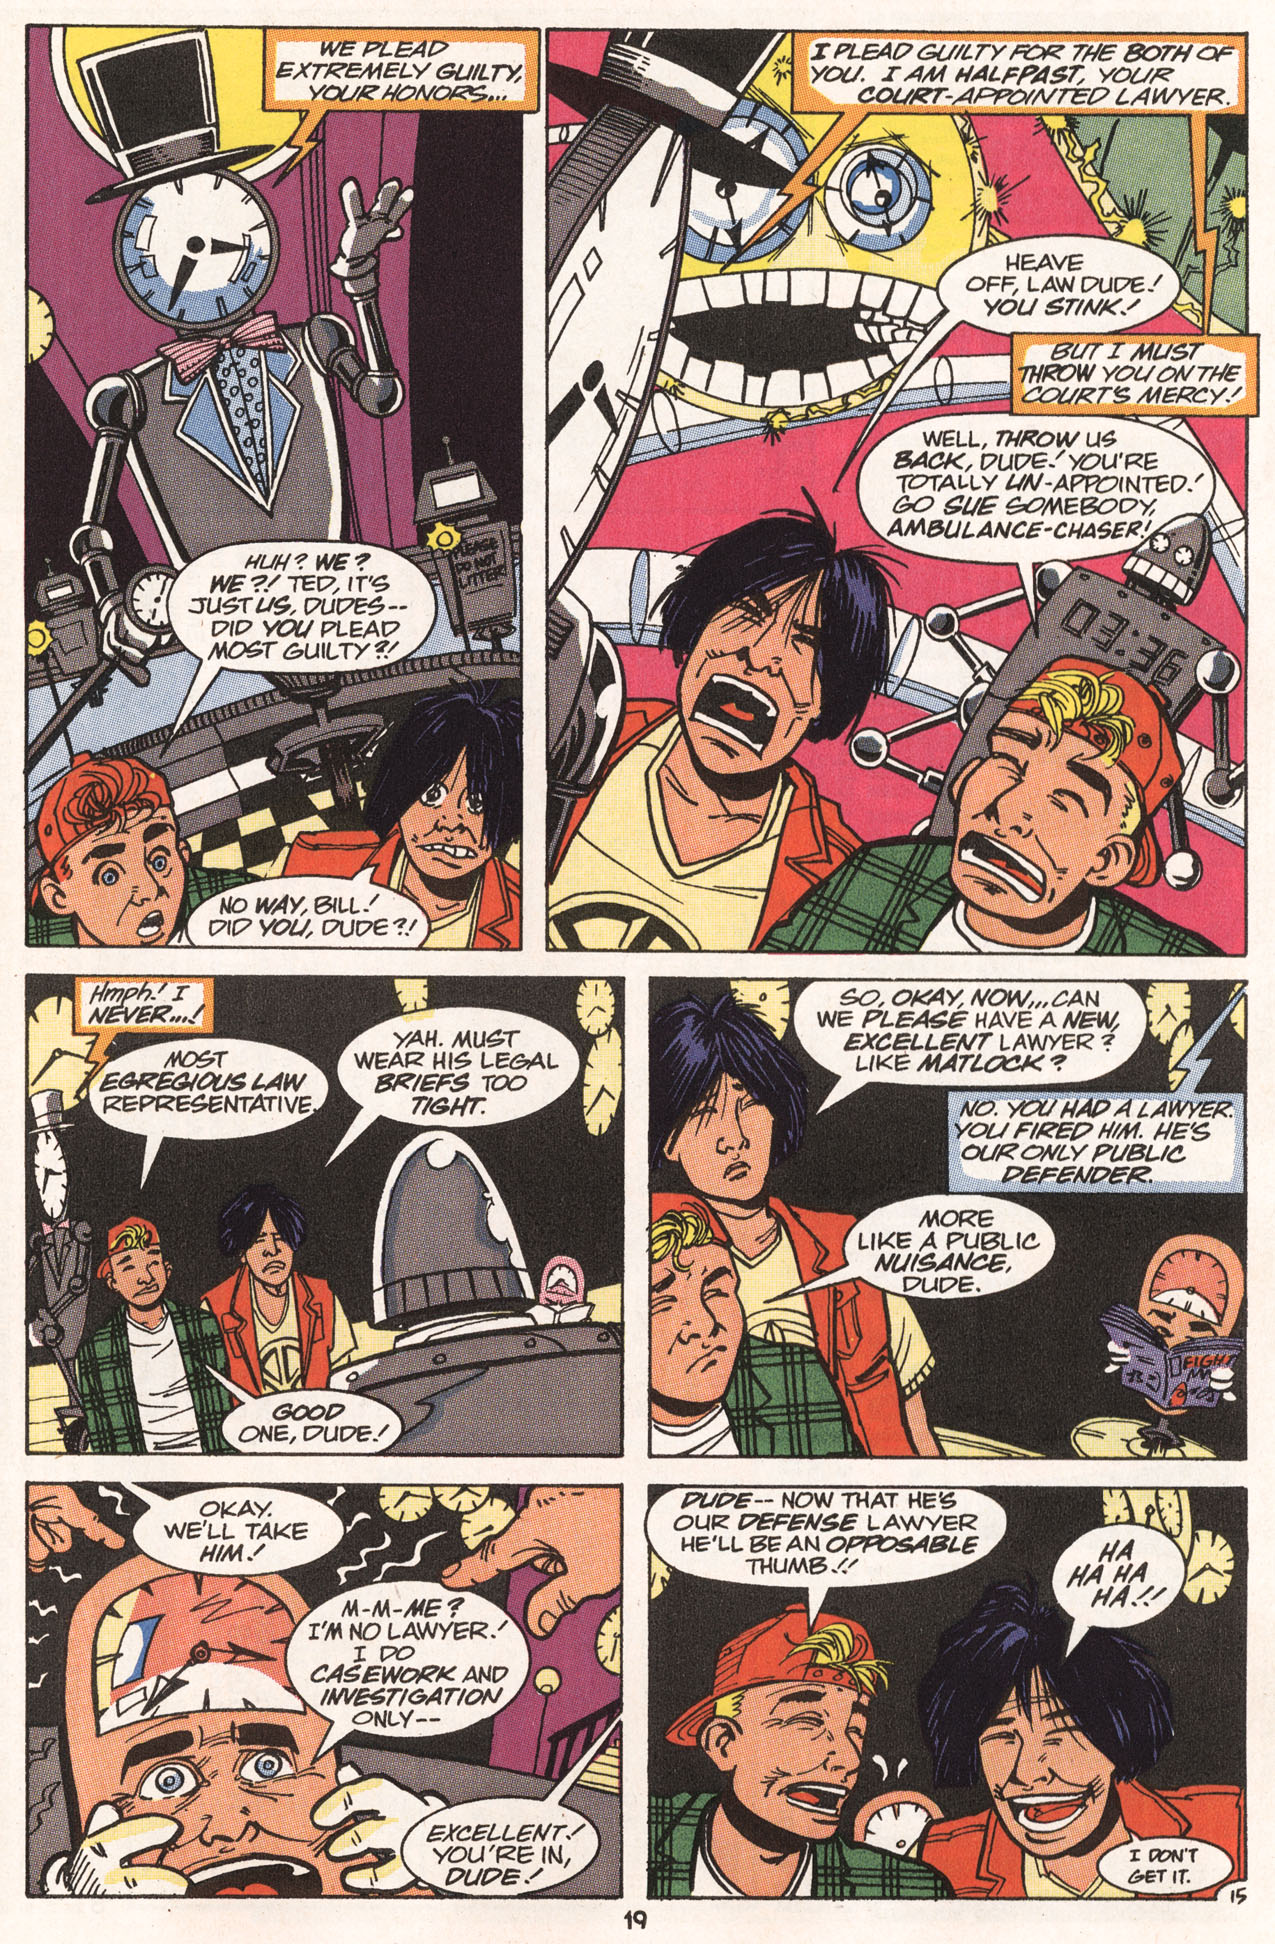 Read online Bill & Ted's Excellent Comic Book comic -  Issue #6 - 21